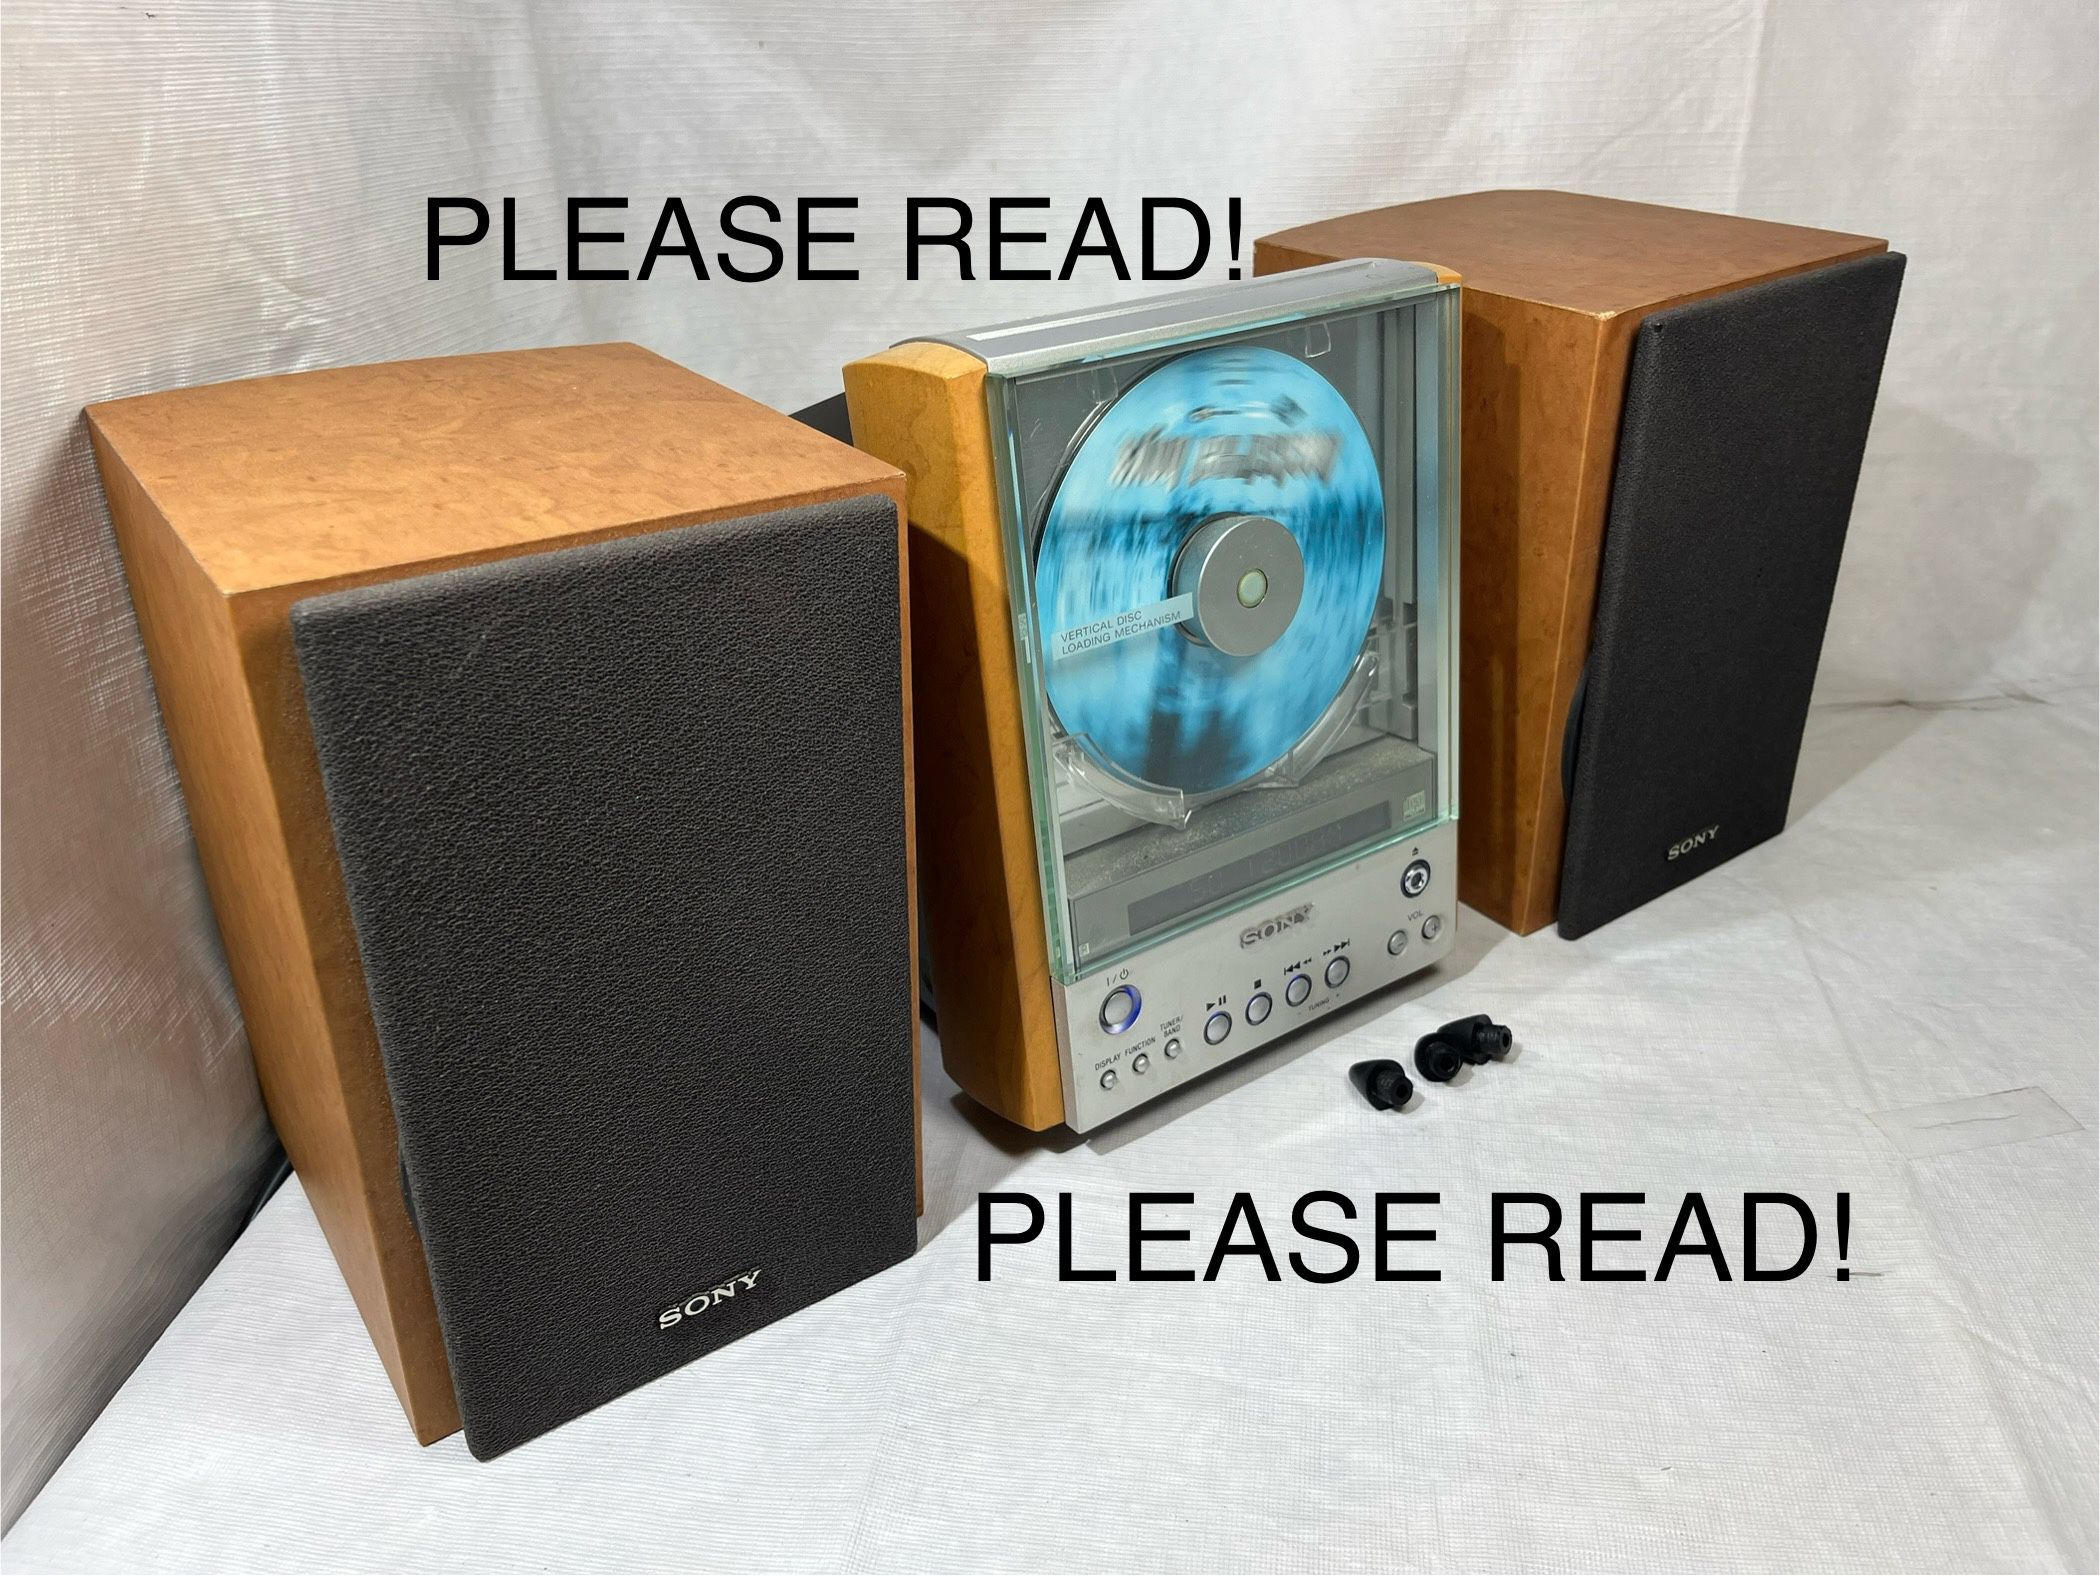 Retro Vintage Sony HCD-EX1 CD Player AM/FM Radio Antenna  Compact Component System Vertical Disc Loading Mechanism Stereo Receiver Bookshelf Speakers